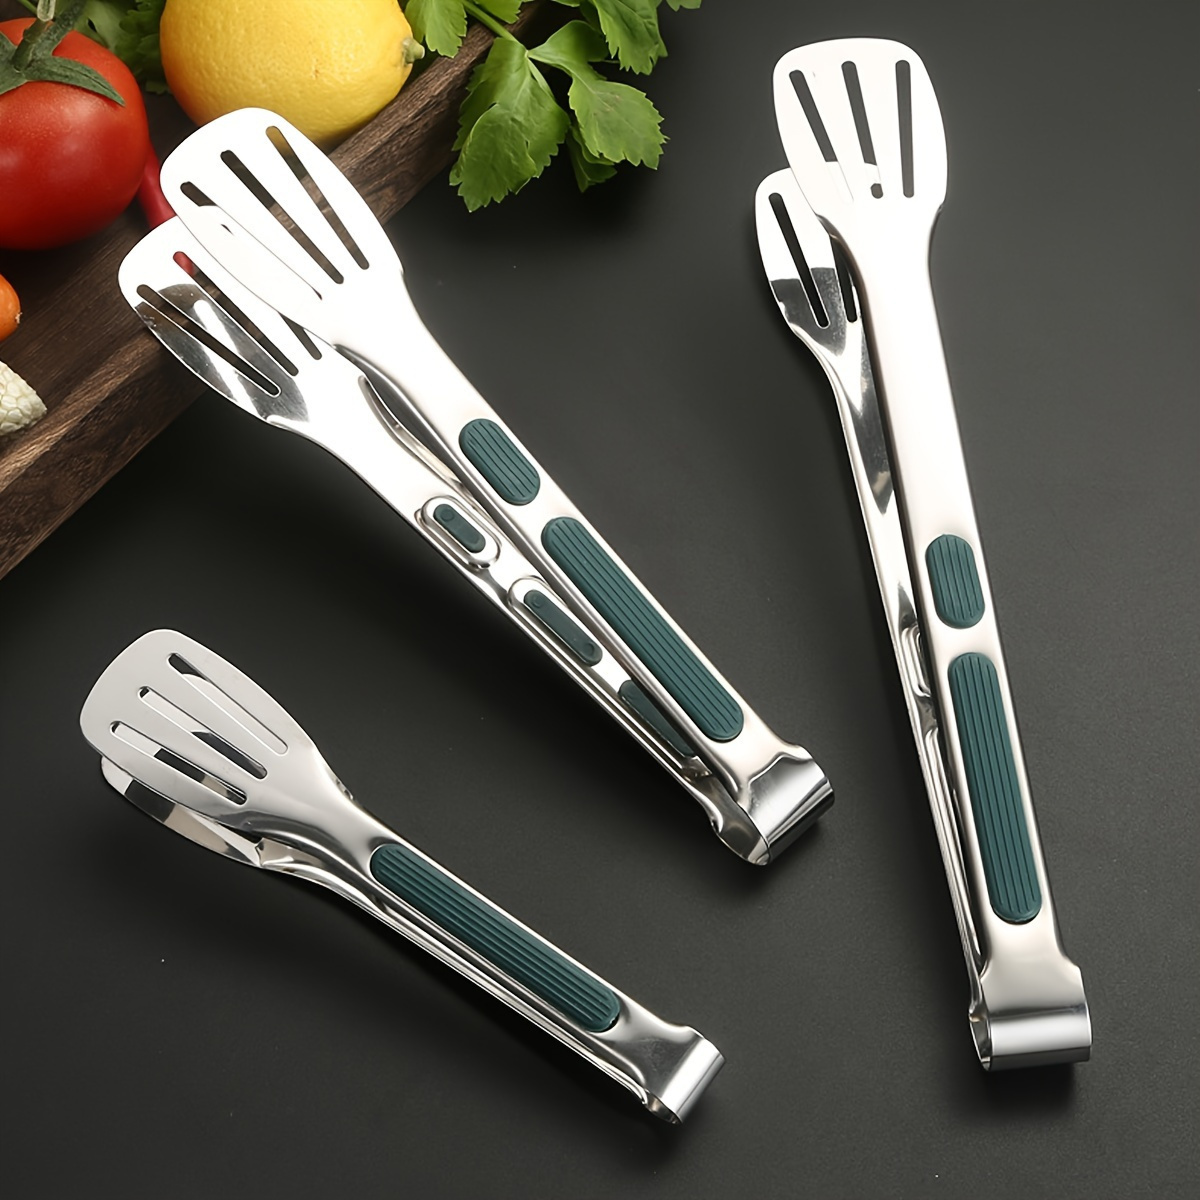 

3pcs/set Stainless Steel Food Tongs, Non-slip Meat Salad Bread Serving Clips, Barbecue Grill Buffet Clamps, Cooking Tools, Kitchen Accessories